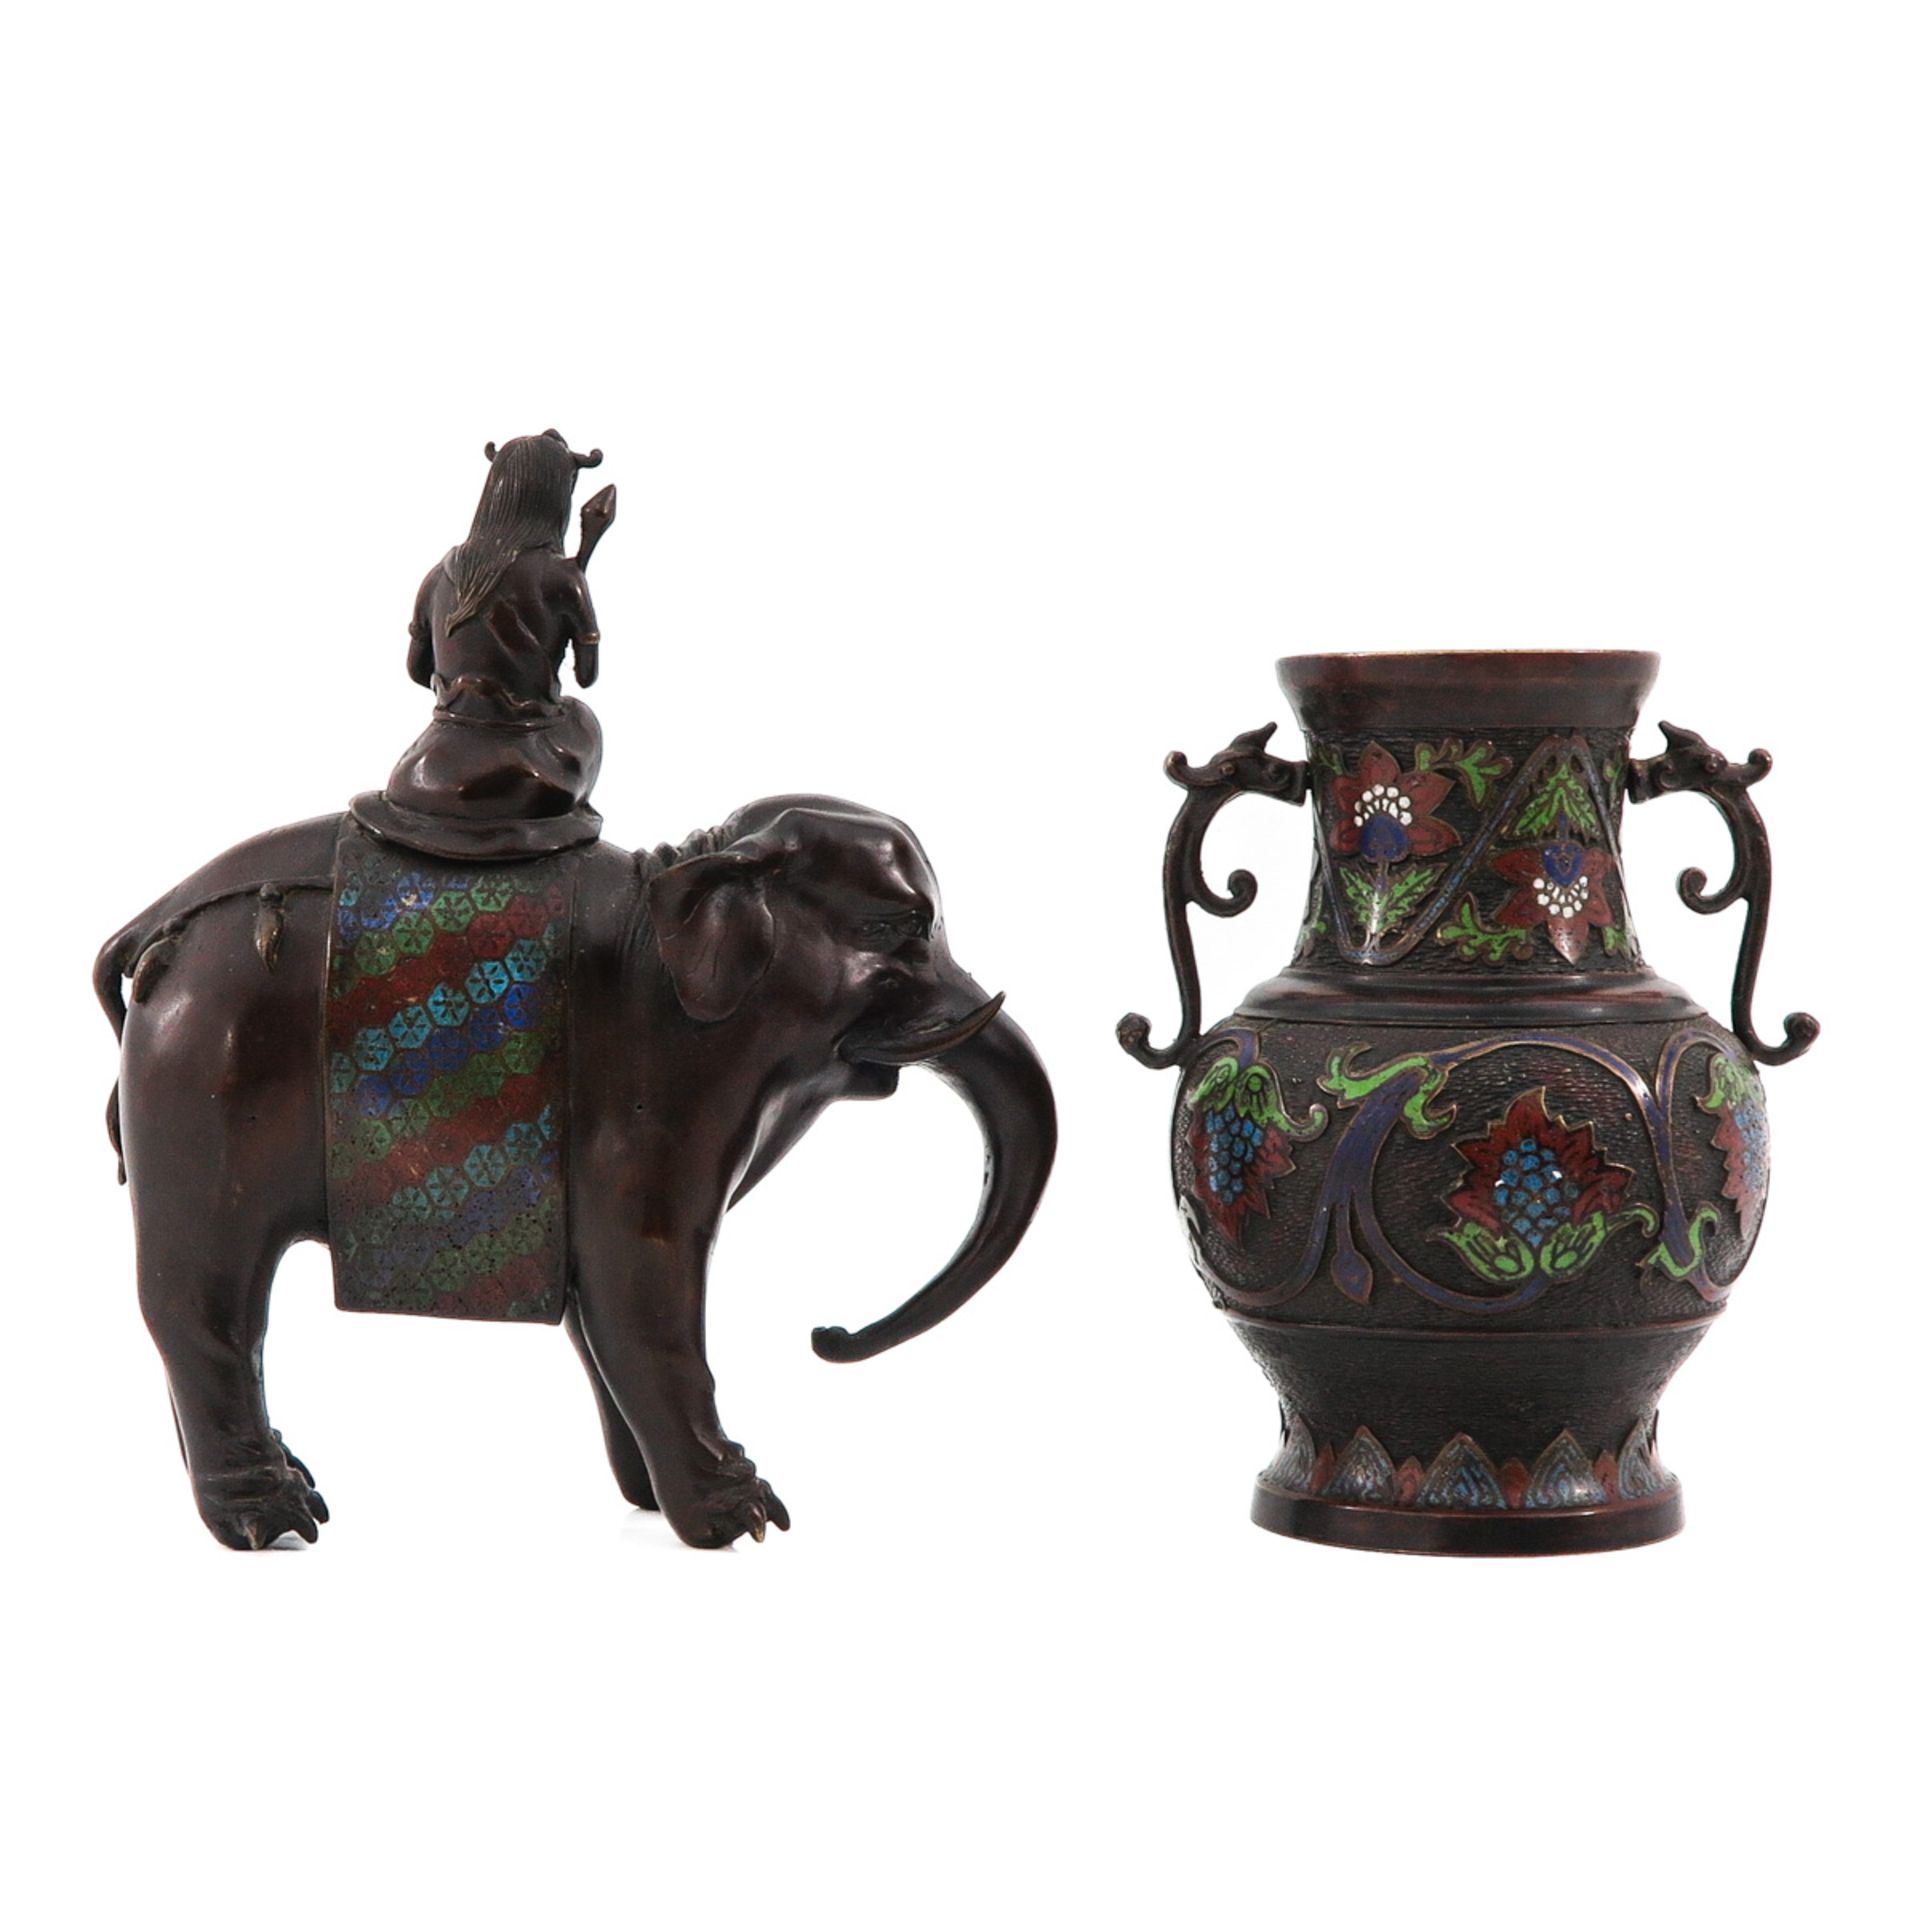 A Cloisonne Sculpture and Vase - Image 3 of 10